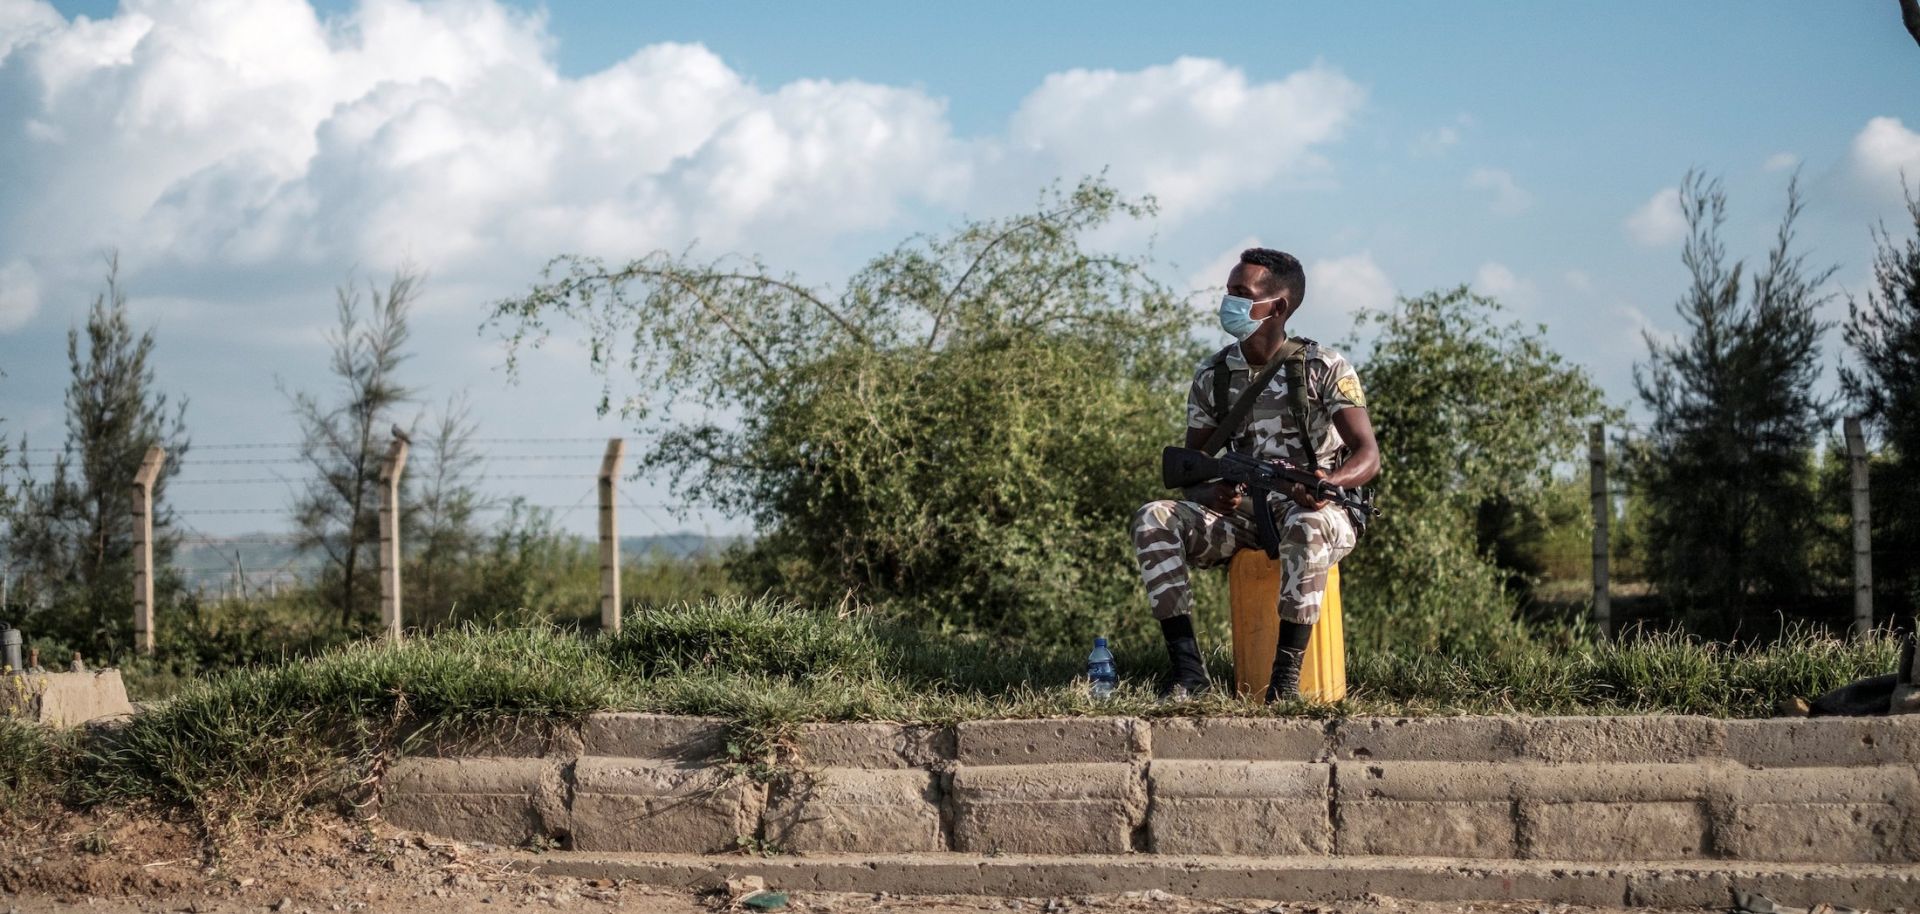 A checkpoint on Sept. 9, 2020, in Mekele, Ethiopia, the day Tigray held regional elections.